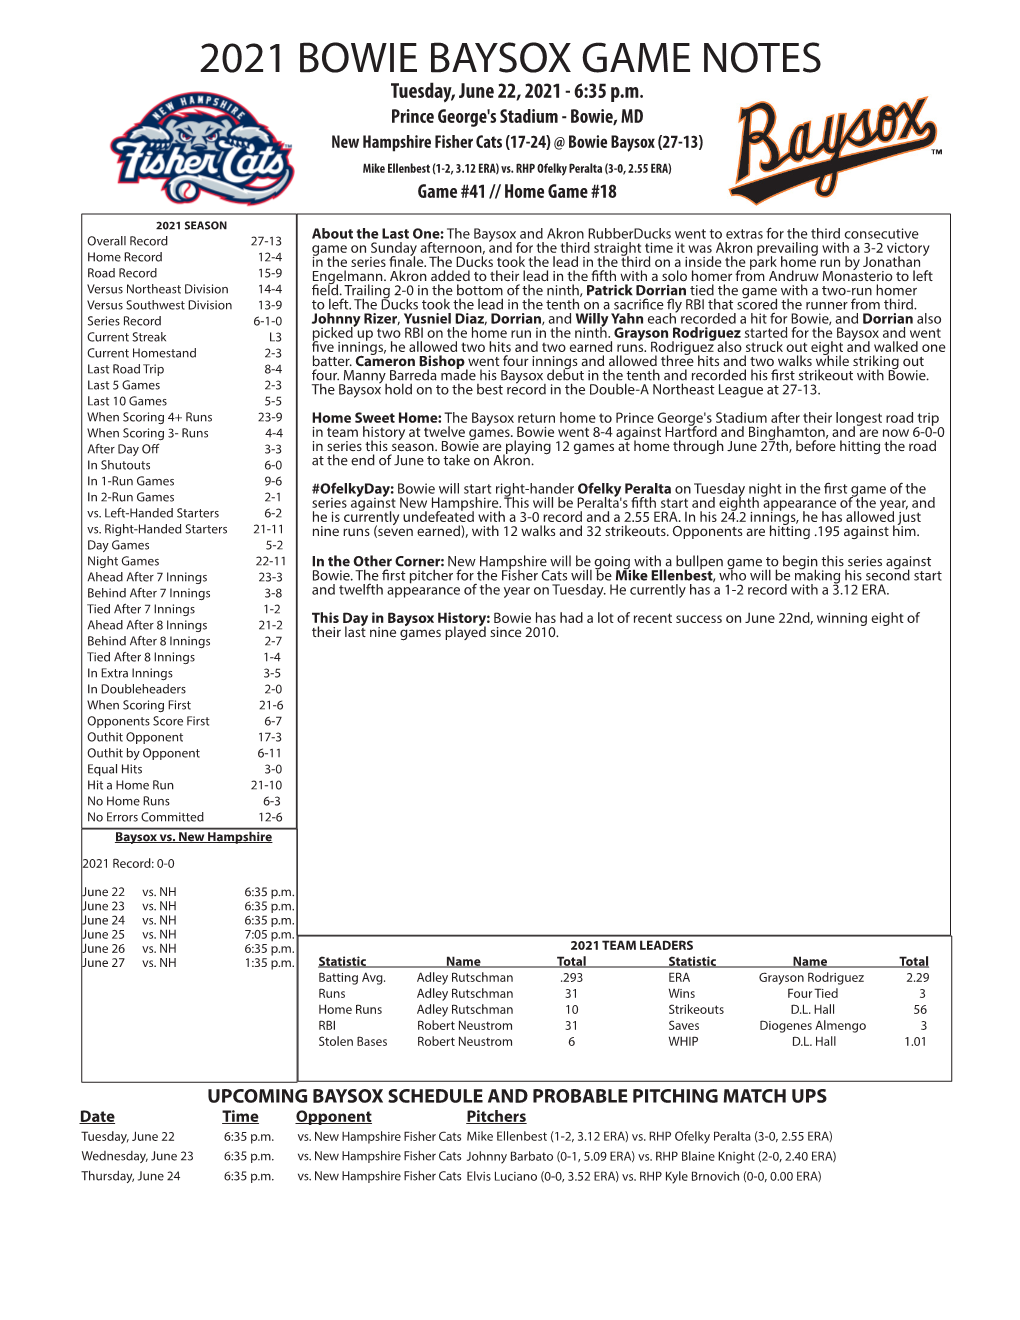 2021 BOWIE BAYSOX GAME NOTES Tuesday, June 22, 2021 - 6:35 P.M